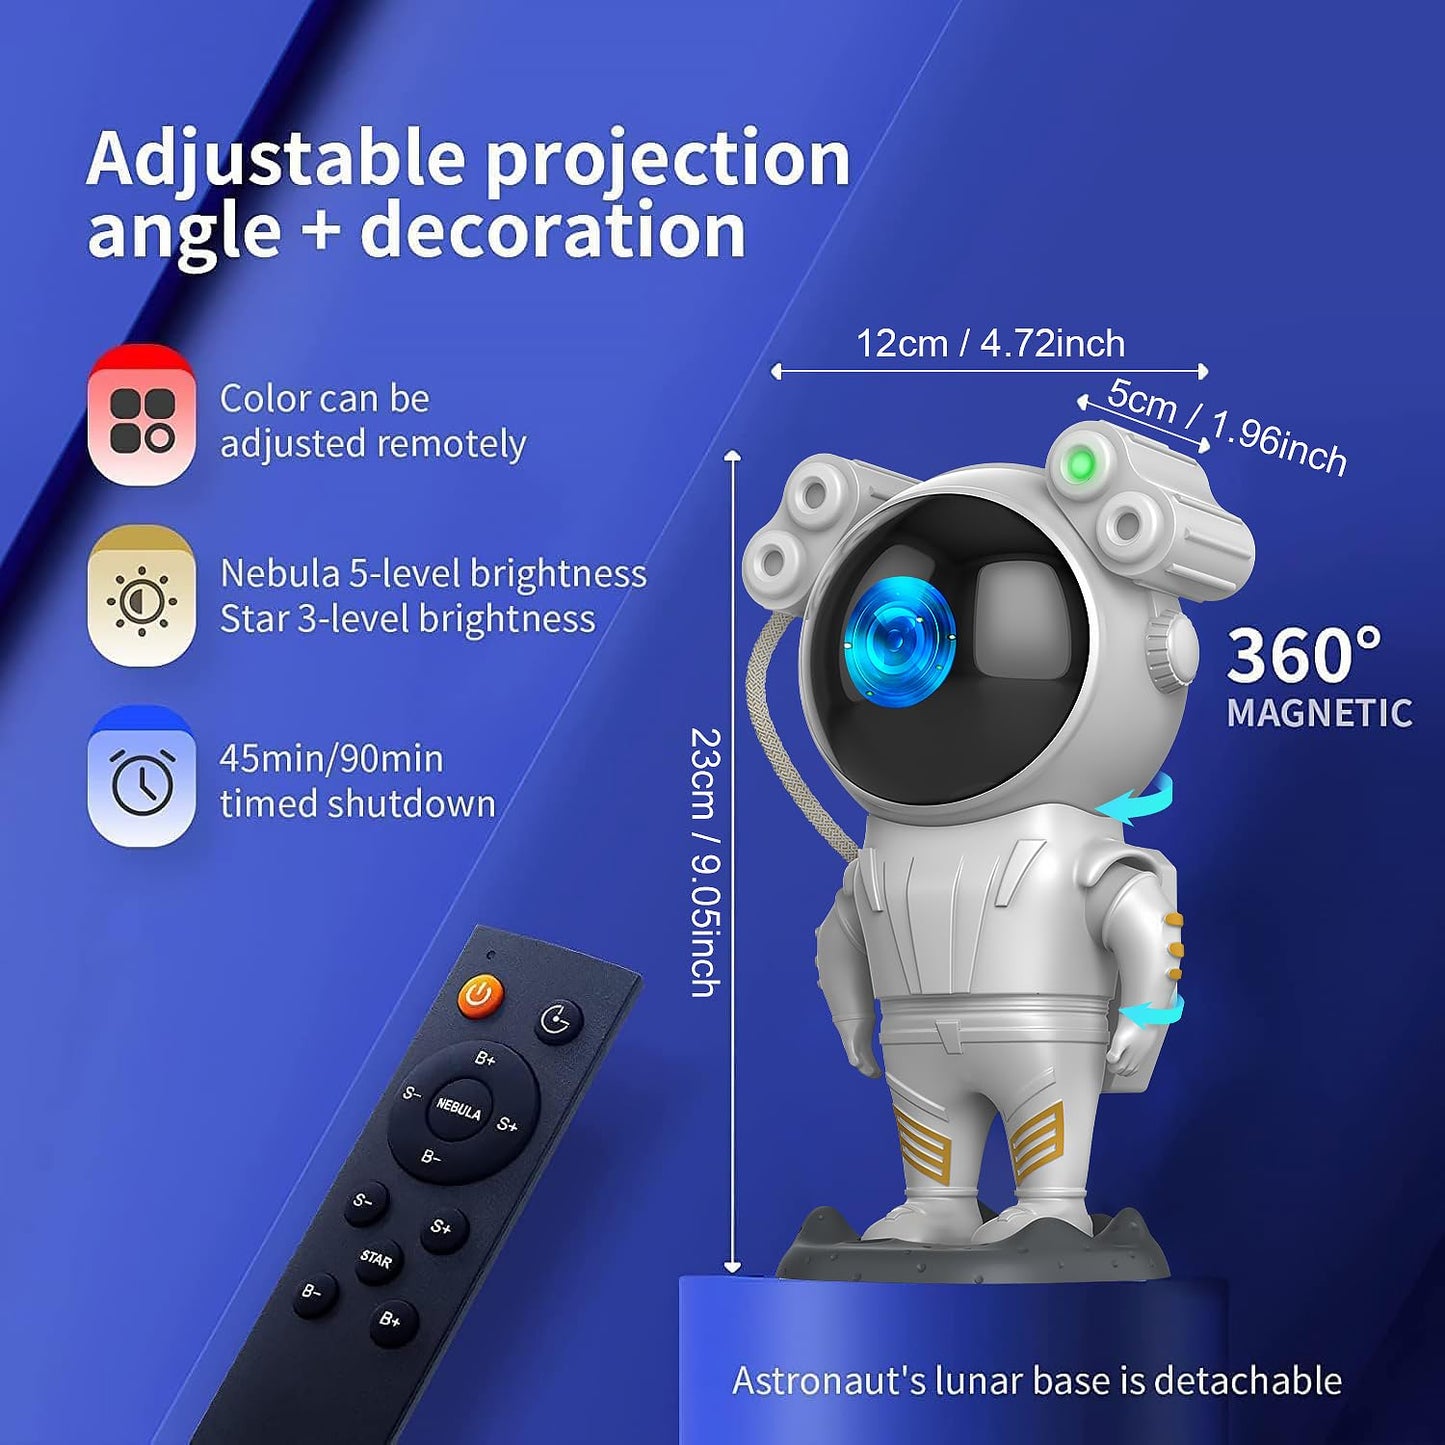 Dienmern Astronaut Galaxy Star Projector Night Light, Light Projector with Nebula,Timer&Remote Control,Ceiling Projector, Acrylonitrile Butadiene Styrene (ABS),LED,?Corded Electric, 5 Volts, ?White